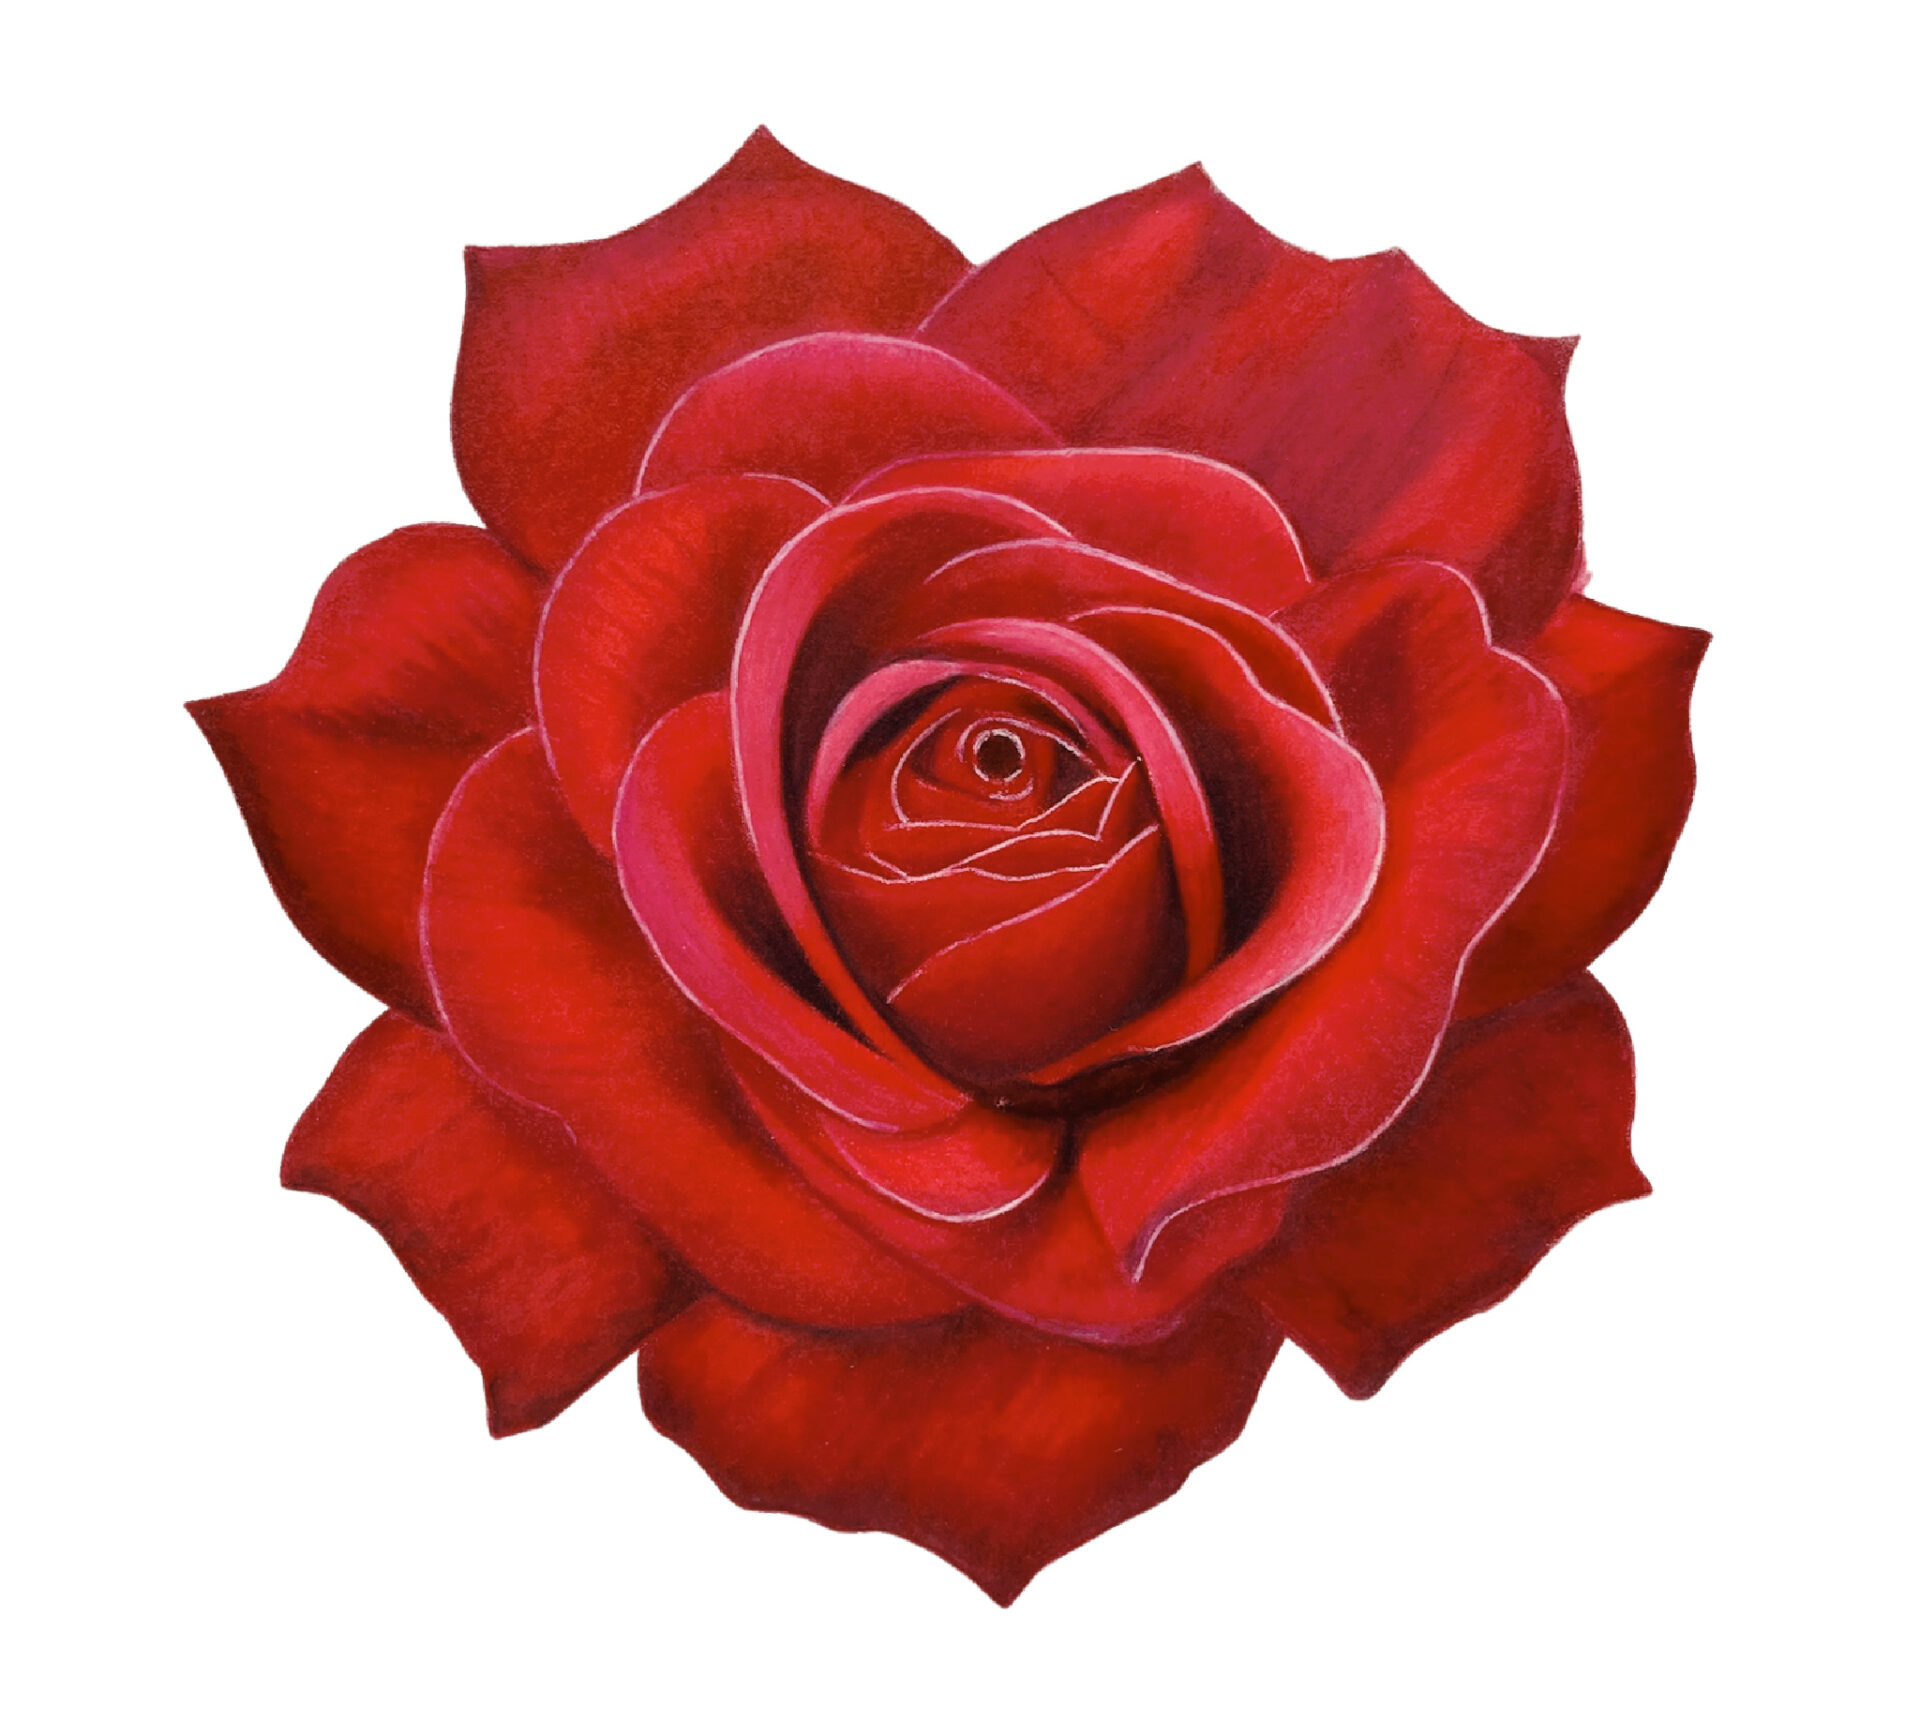 Colored Pencil Drawing of a Bright Red Rose